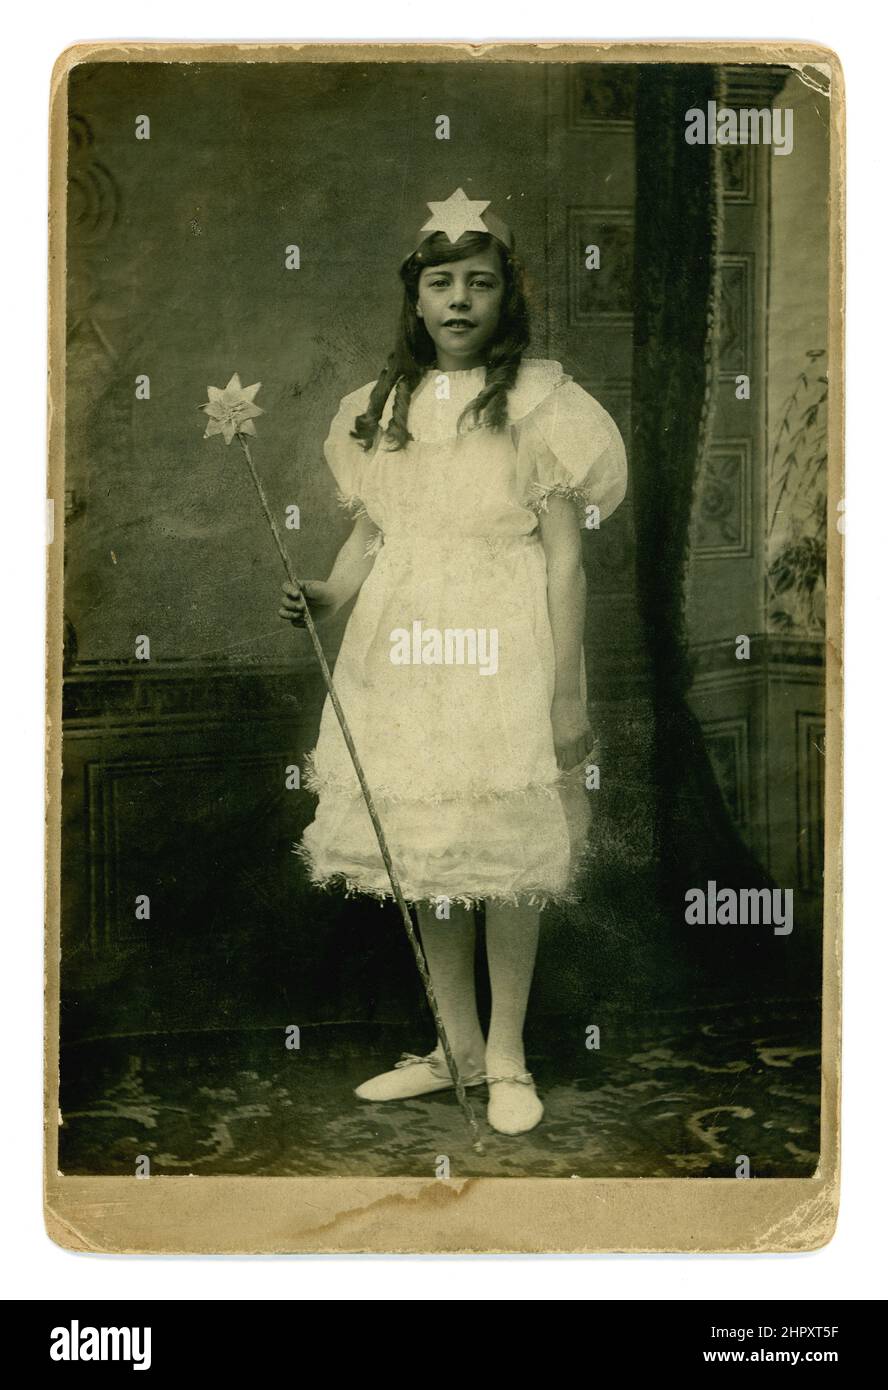 Original and charming Victorian cabinet card studio portrait of smiling older girl wearing a fairy costume with tinsel trim, holding a wand, she has large puff sleeves on a white party dress, fashionable circa 1895. Stock Photo